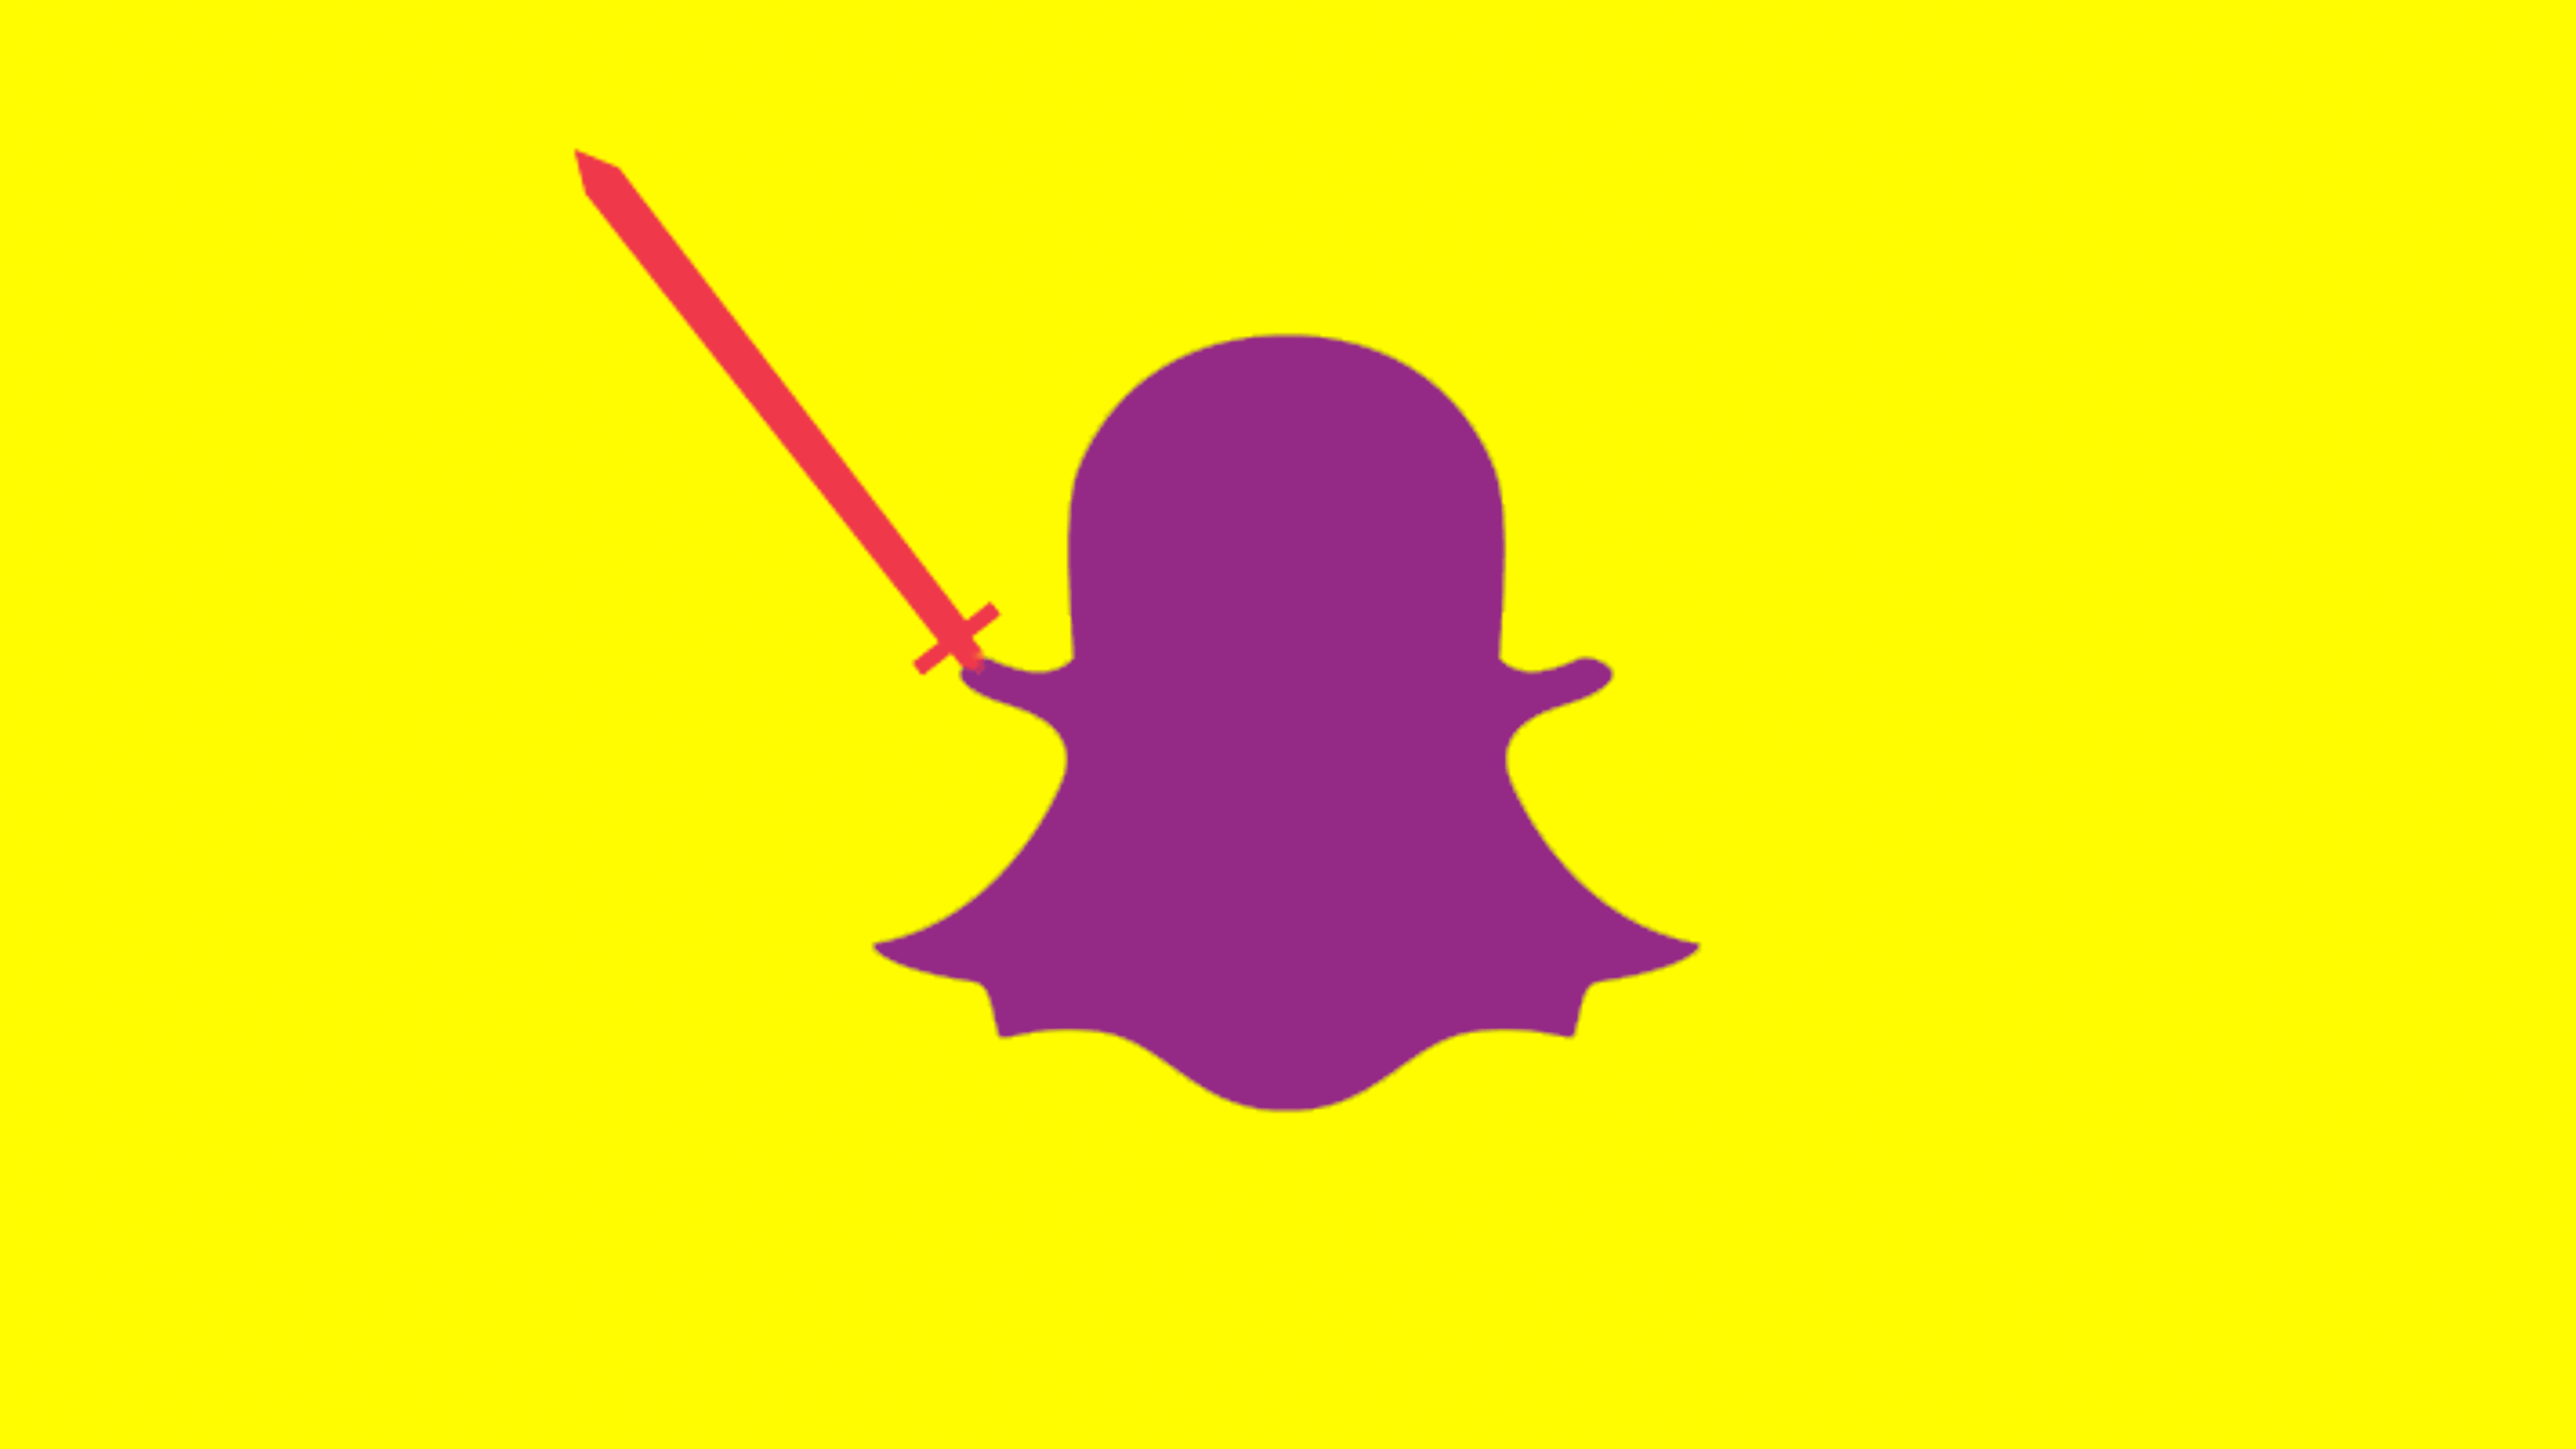 How to use Snapchat to market your startup